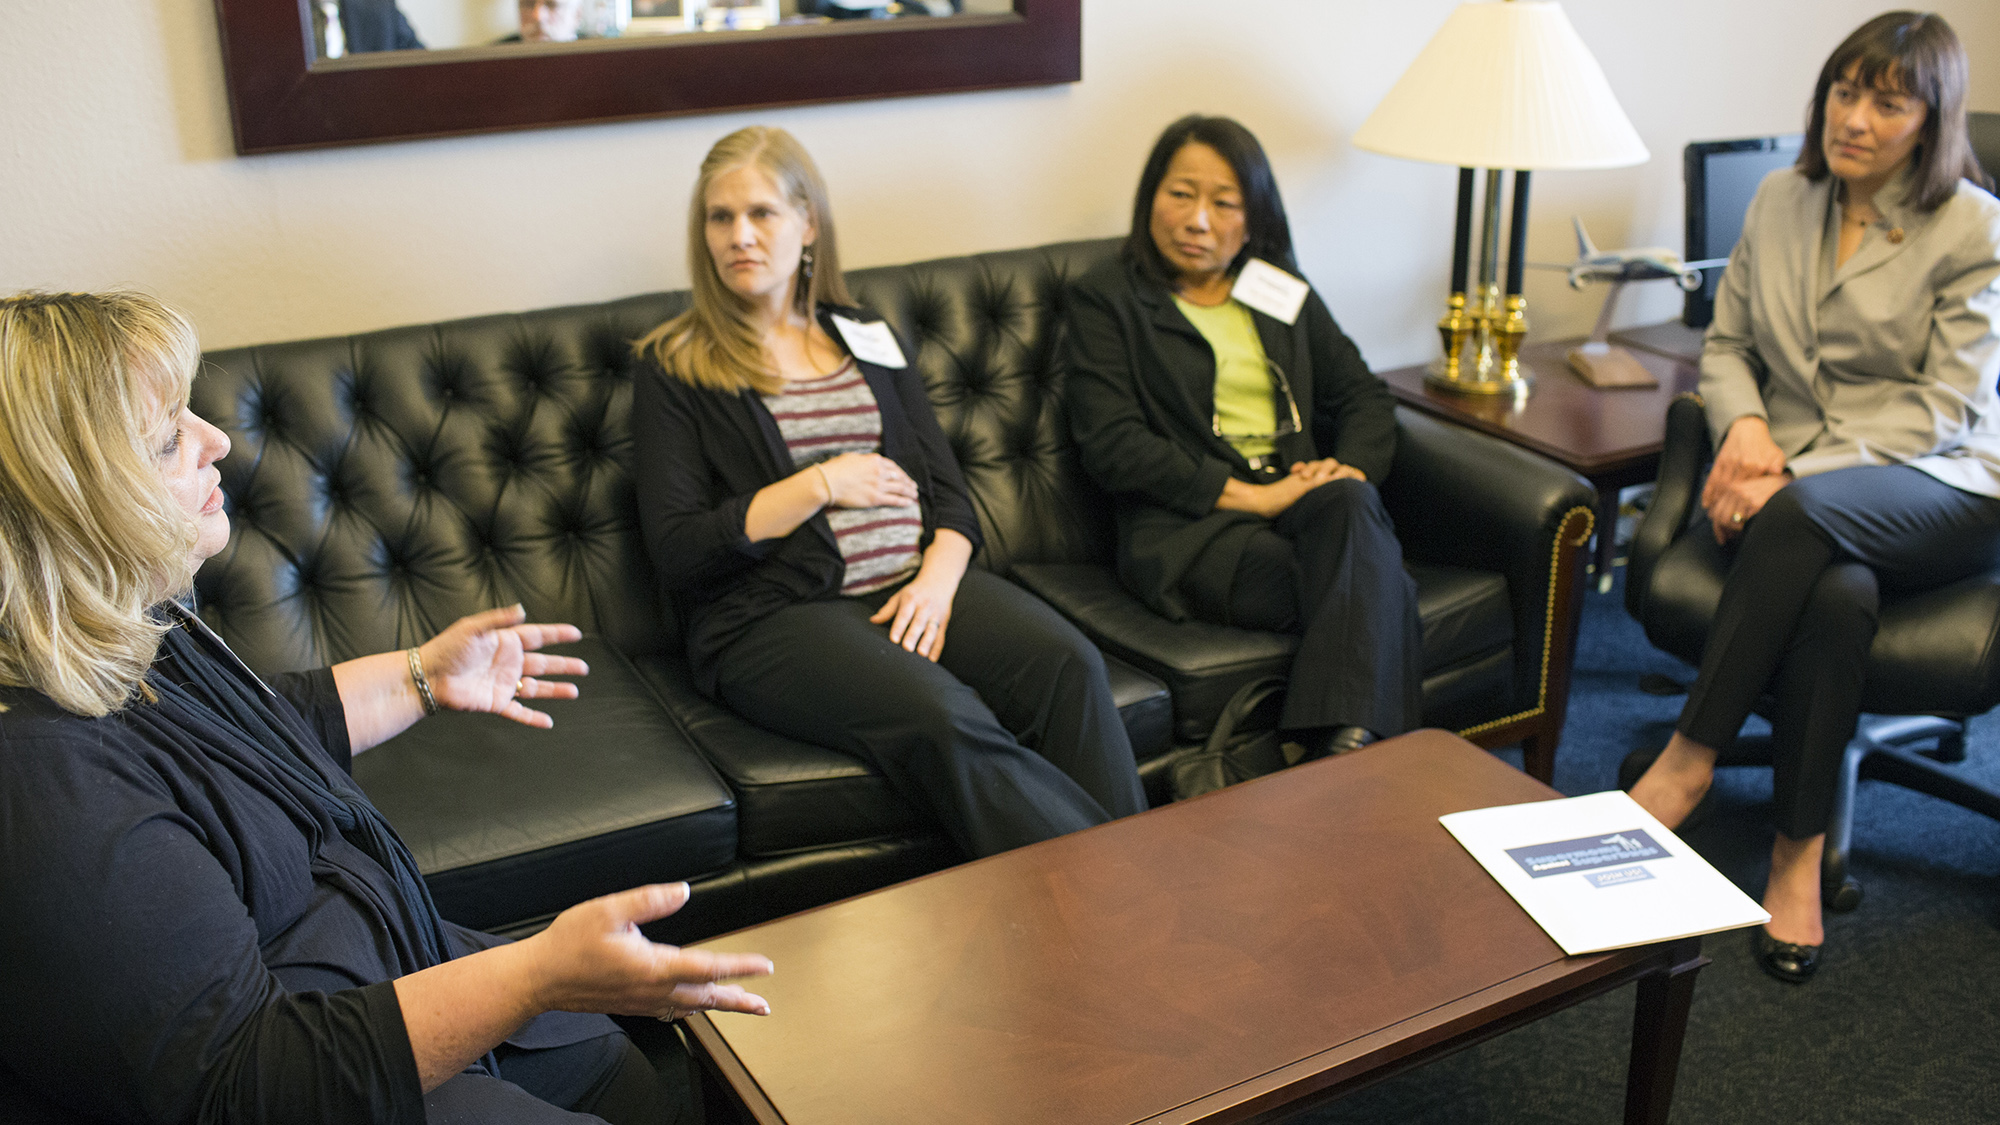 Cheryl Perron (left), whose son lost his leg and nearly his life due to an antibiotic-resistant infection, talks about the need for stronger regulation to end the overuse of antibiotics in agriculture with Representative Suzan DelBene (D-WA) (right). With Perron are Bethany Cook (center left), a registered dietitian, and Eiko Vojkovich, an organic farmer.